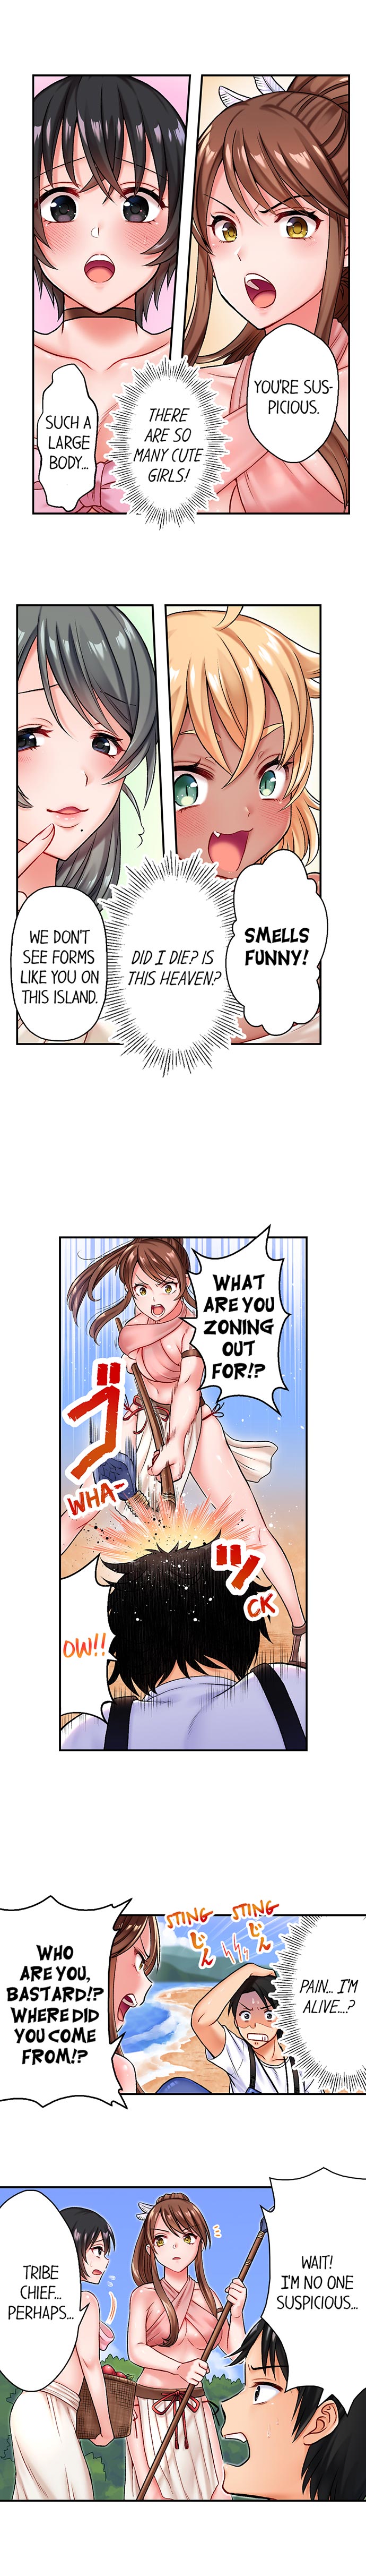 Girls' Island: Only I Can Fuck Them All! - Chapter 1 Page 5